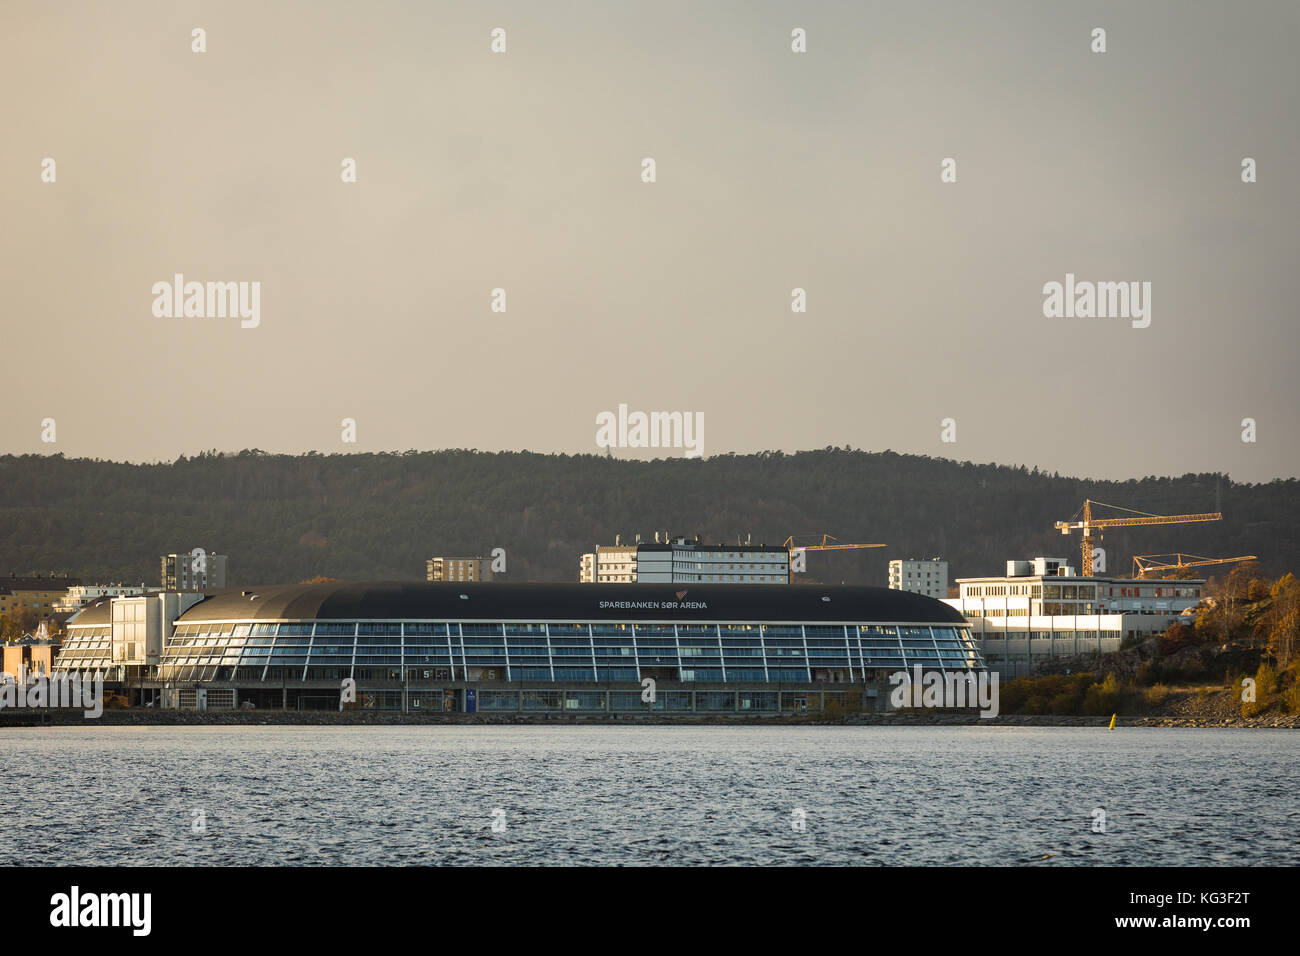 Fremmed Procent frugtbart Kristiansand, Norway - October 26, 2017: Sparebanken Sor Arena, the  football arena in Kristiansand, seen from the seaside Stock Photo - Alamy